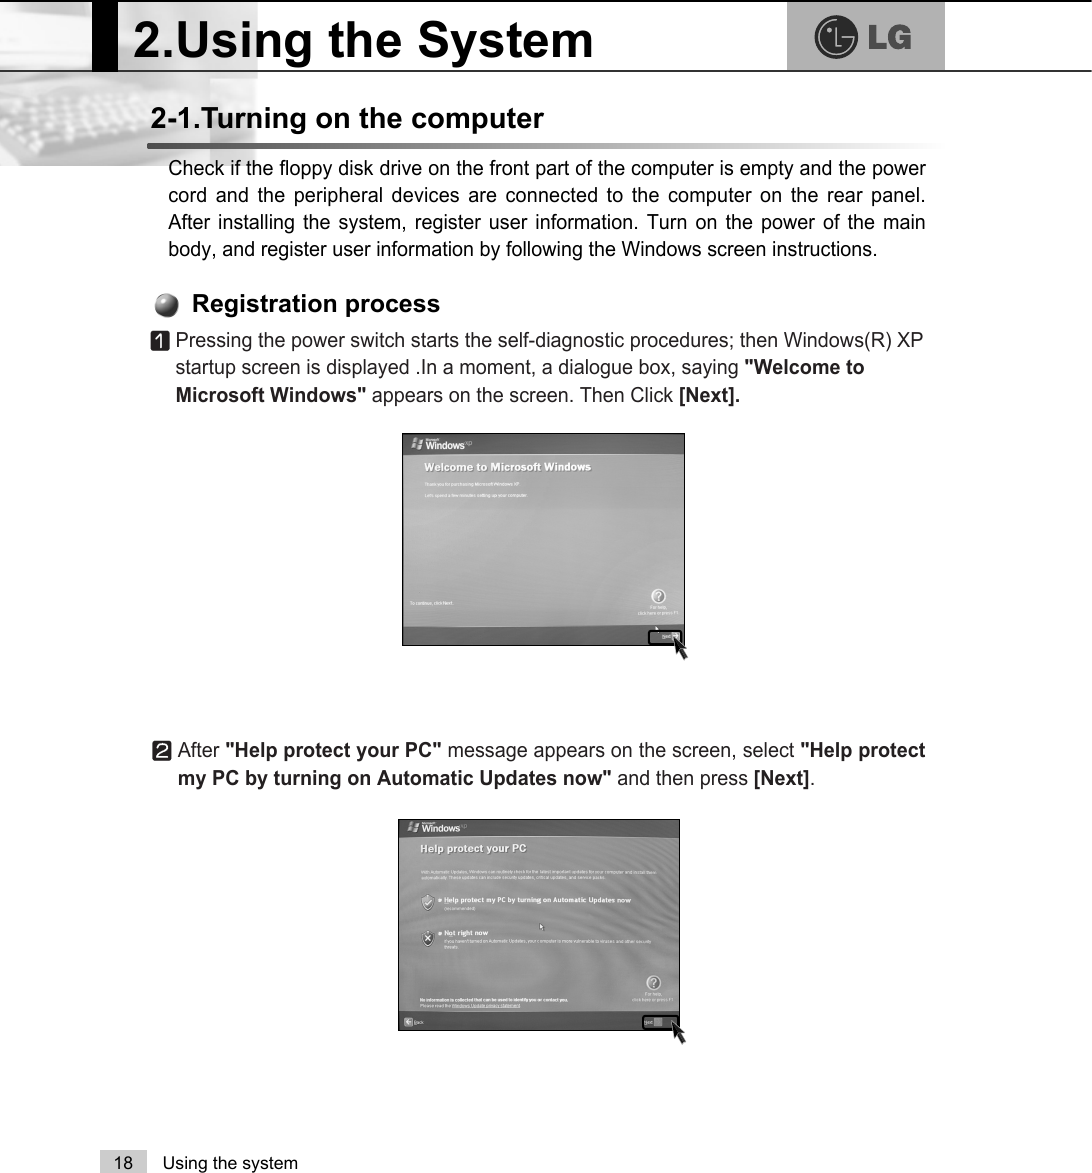 2.Using the System18 Using the systemCheck if the floppy disk drive on the front part of the computer is empty and the powercord and the peripheral devices are connected to the computer on the rear panel.After installing the system, register user information. Turn on the power of the mainbody, and register user information by following the Windows screen instructions.2-1.Turning on the computerⓞPressing the power switch starts the self-diagnostic procedures; then Windows(R) XPstartup screen is displayed .In a moment, a dialogue box, saying &quot;Welcome toMicrosoft Windows&quot; appears on the screen. Then Click [Next].Registration processⓟAfter &quot;Help protect your PC&quot; message appears on the screen, select &quot;Help protectmy PC by turning on Automatic Updates now&quot; and then press [Next]. 